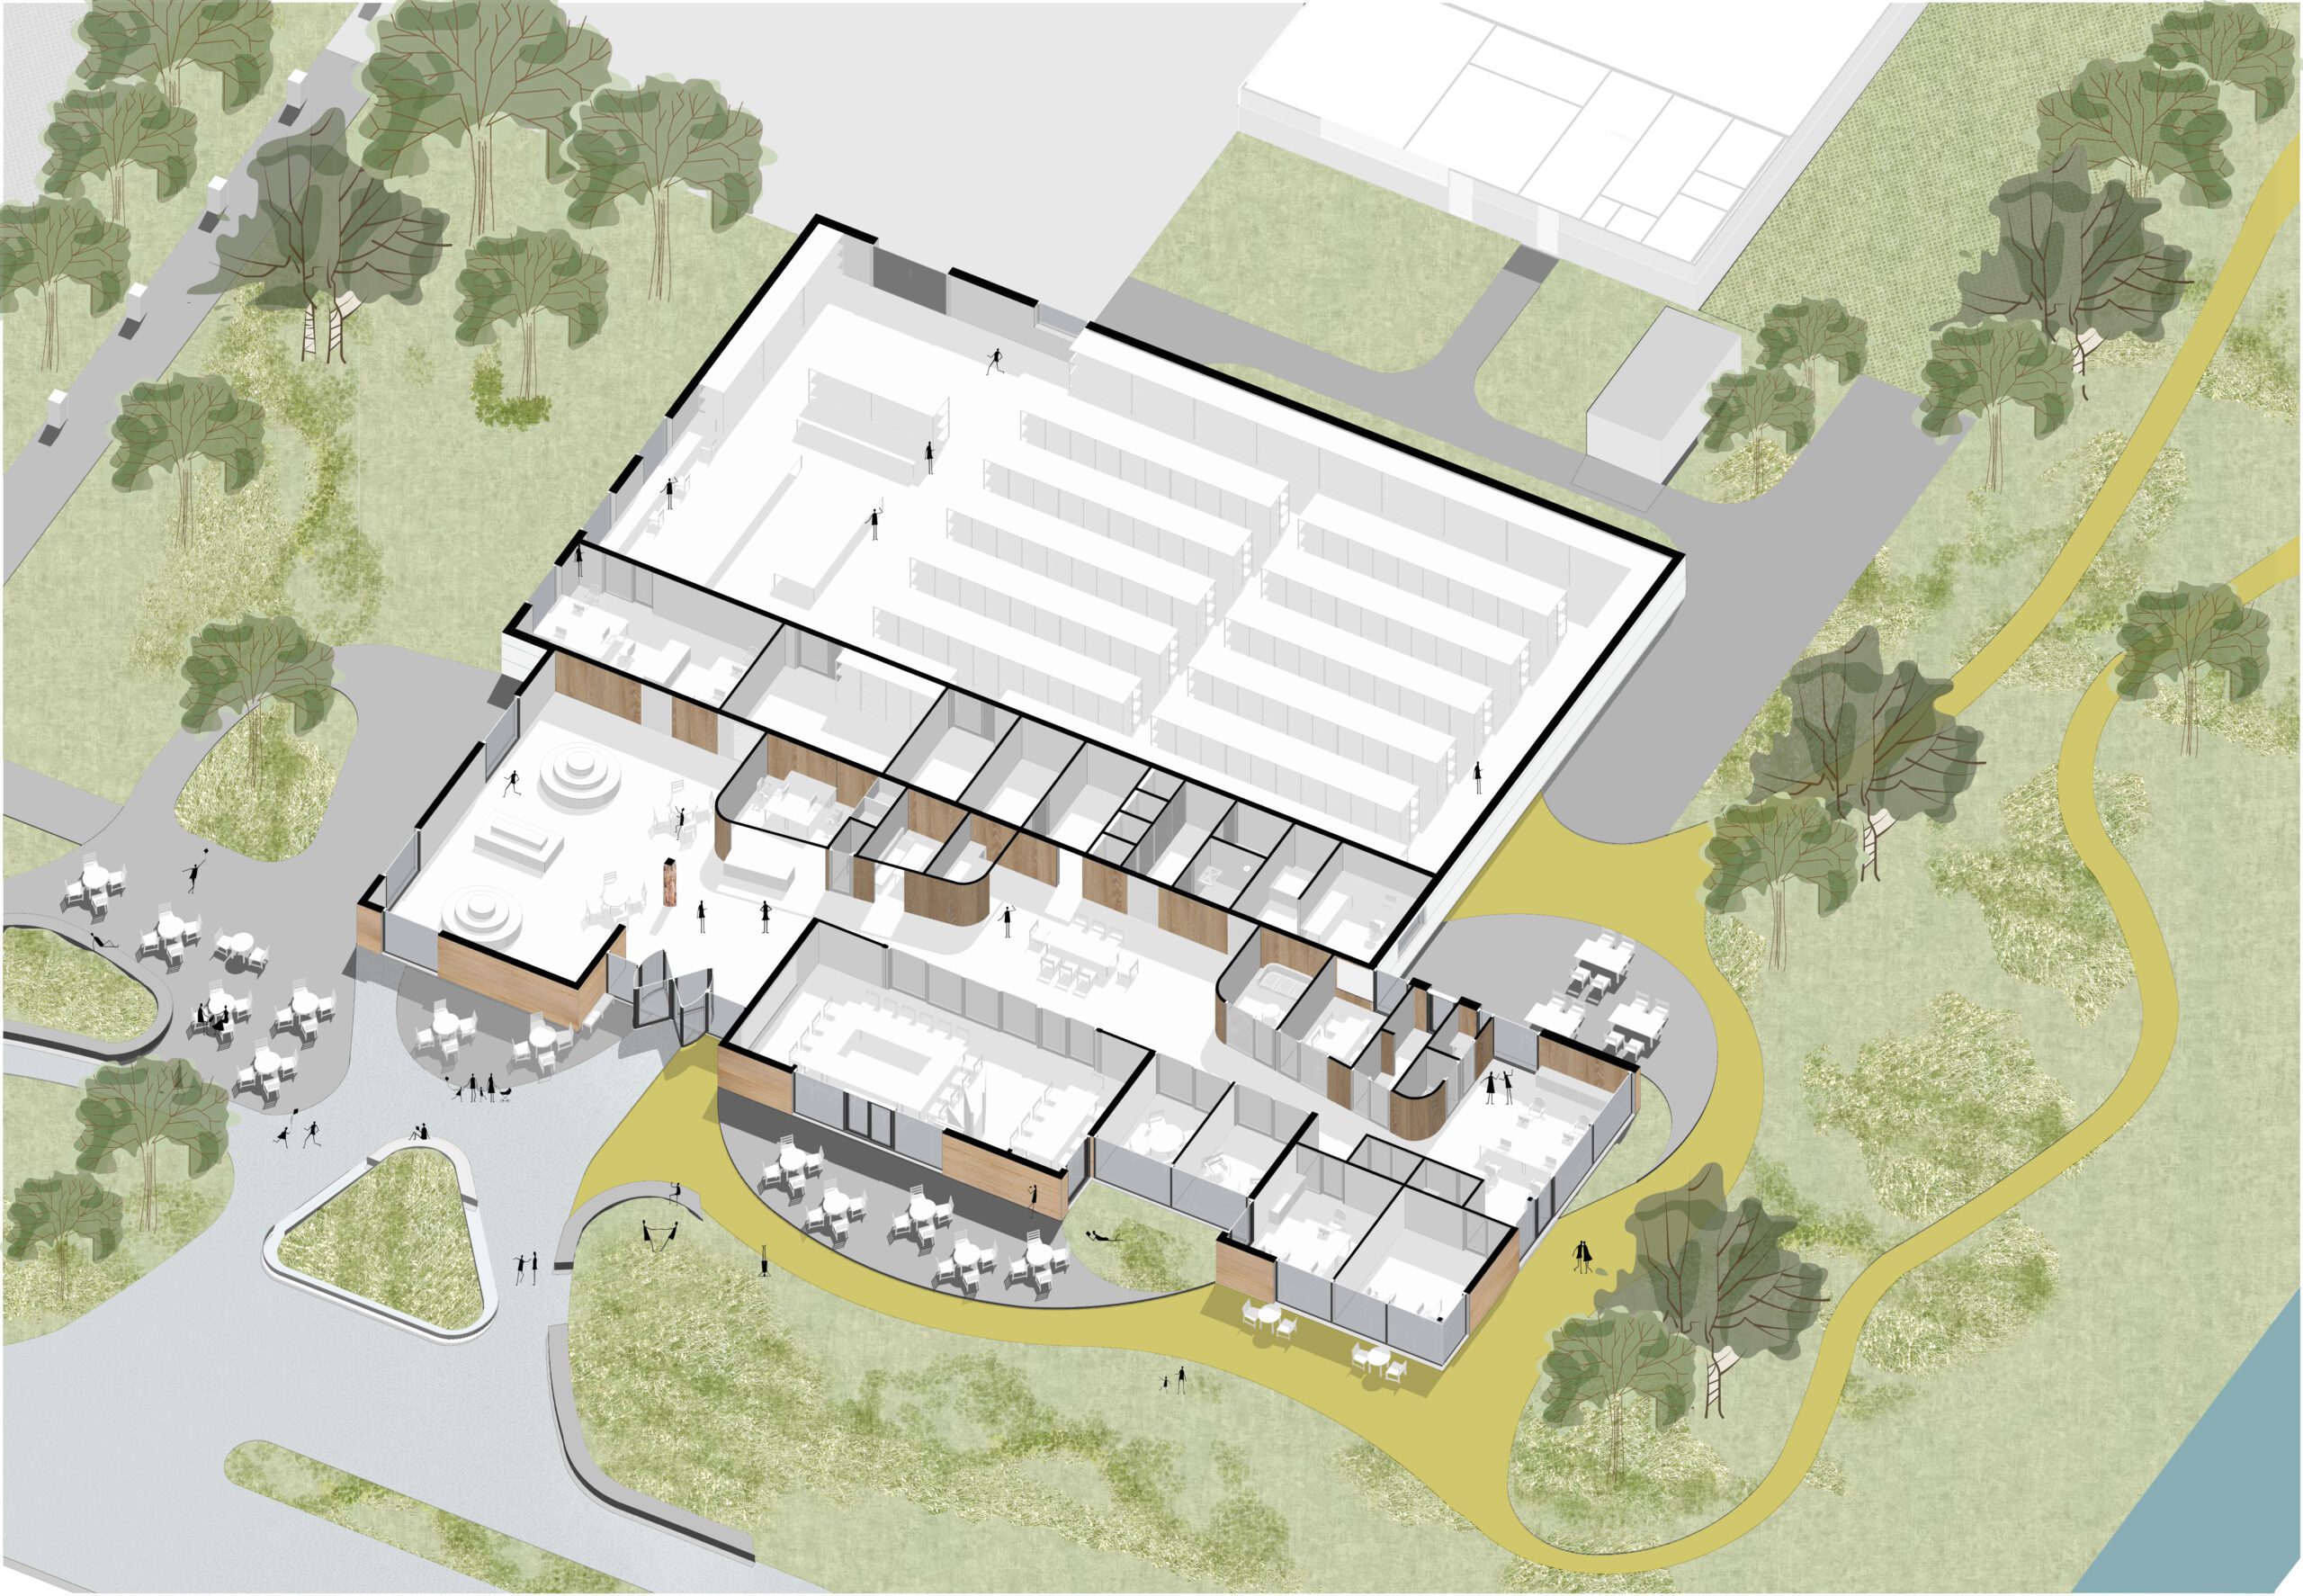 Sectional axonometric drawing showing an overview of the preliminary design, including the workspace, meeting rooms, exhibition area and storage facilities for the Scouting Basecamp, designed by MOST Architecture.